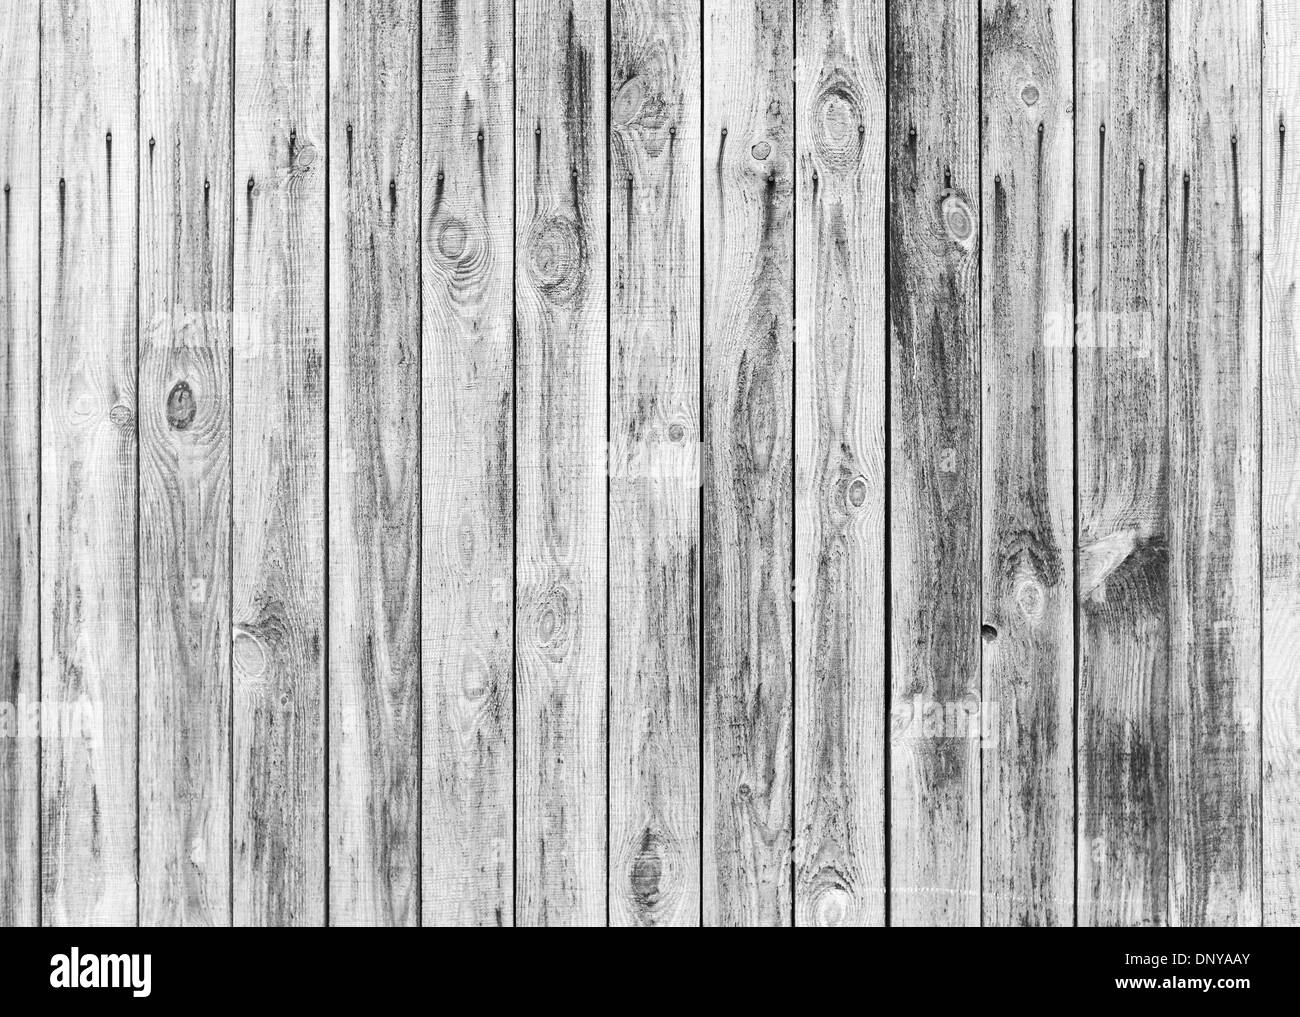 White weathered wooden wall background photo texture Stock Photo